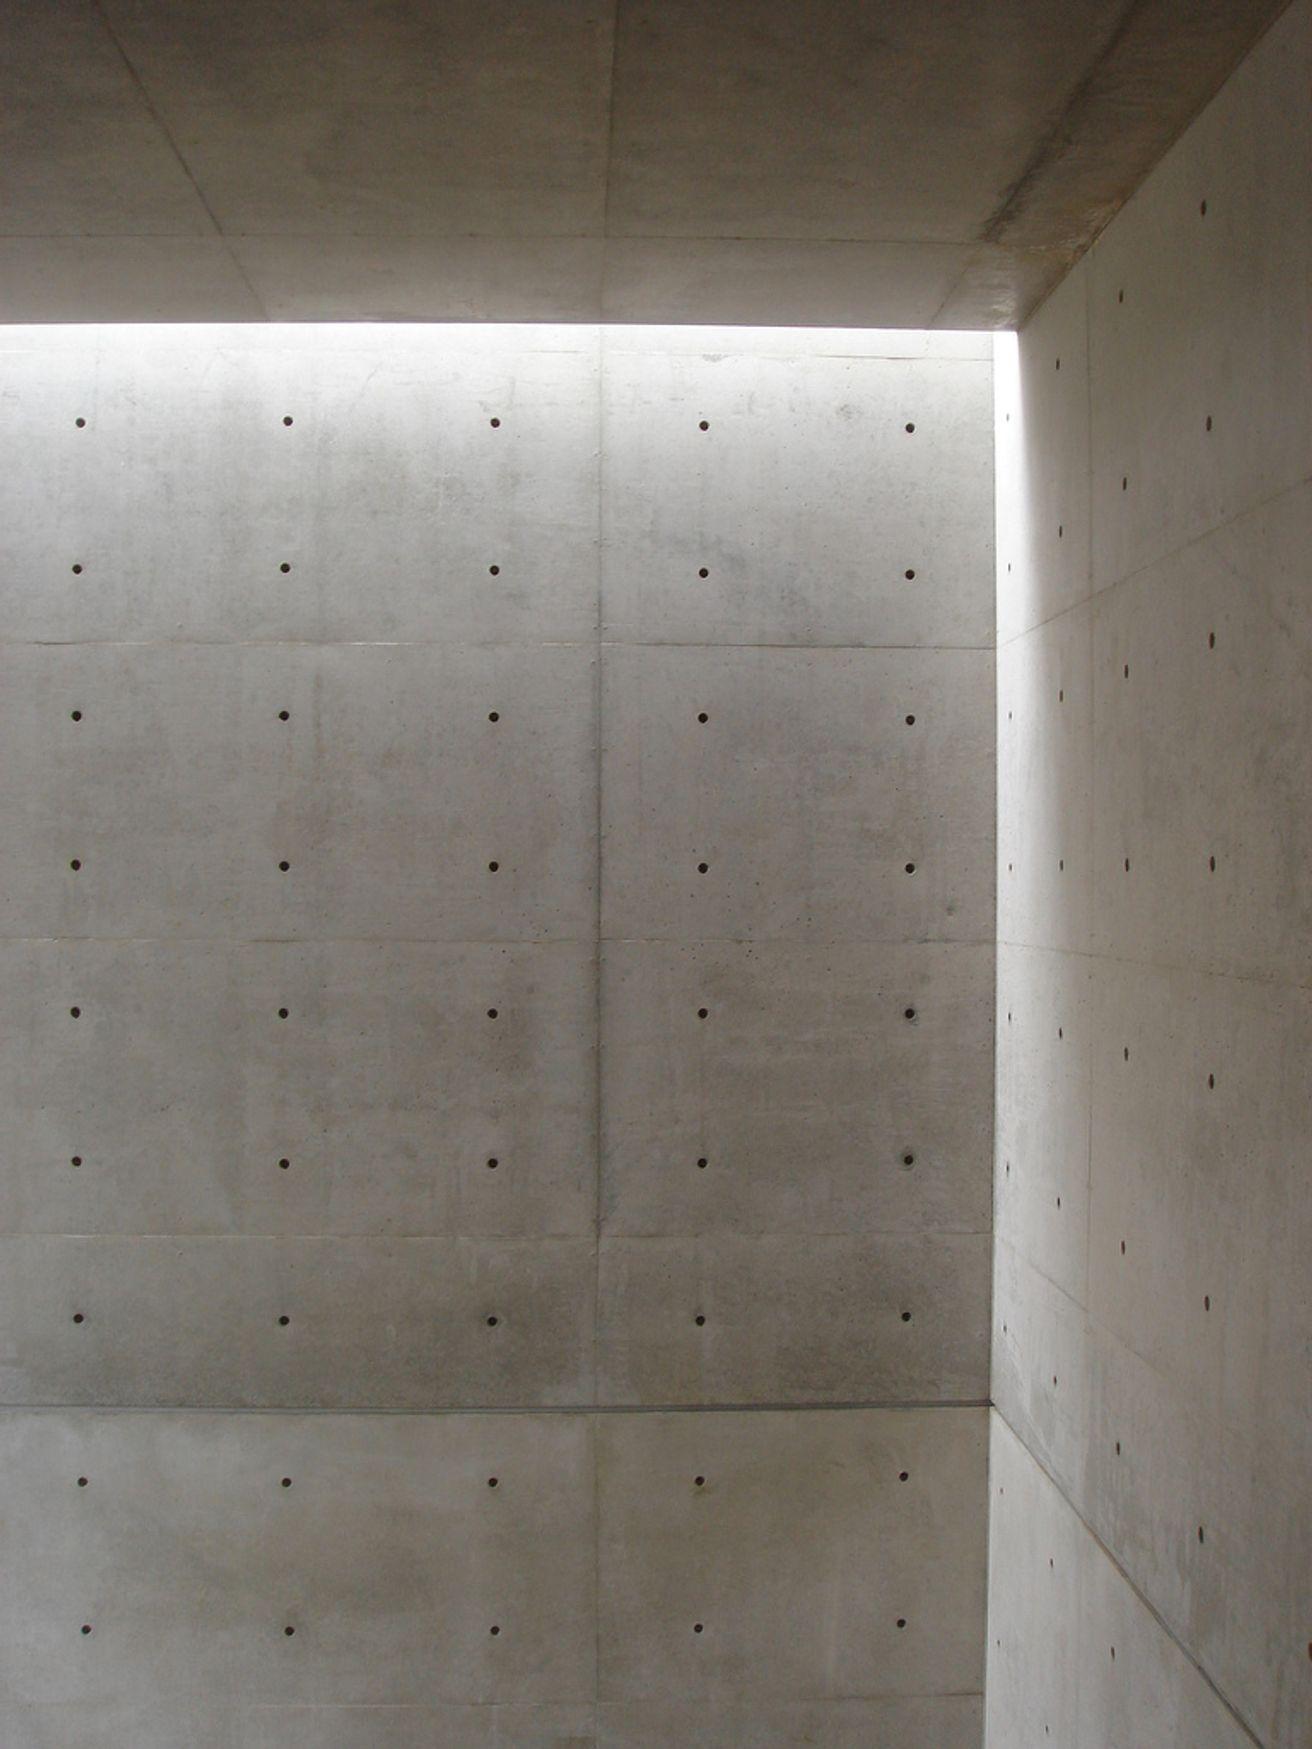 Japanese Architect Tadao Ando's Church of the Light Temporarily Suspends Tours